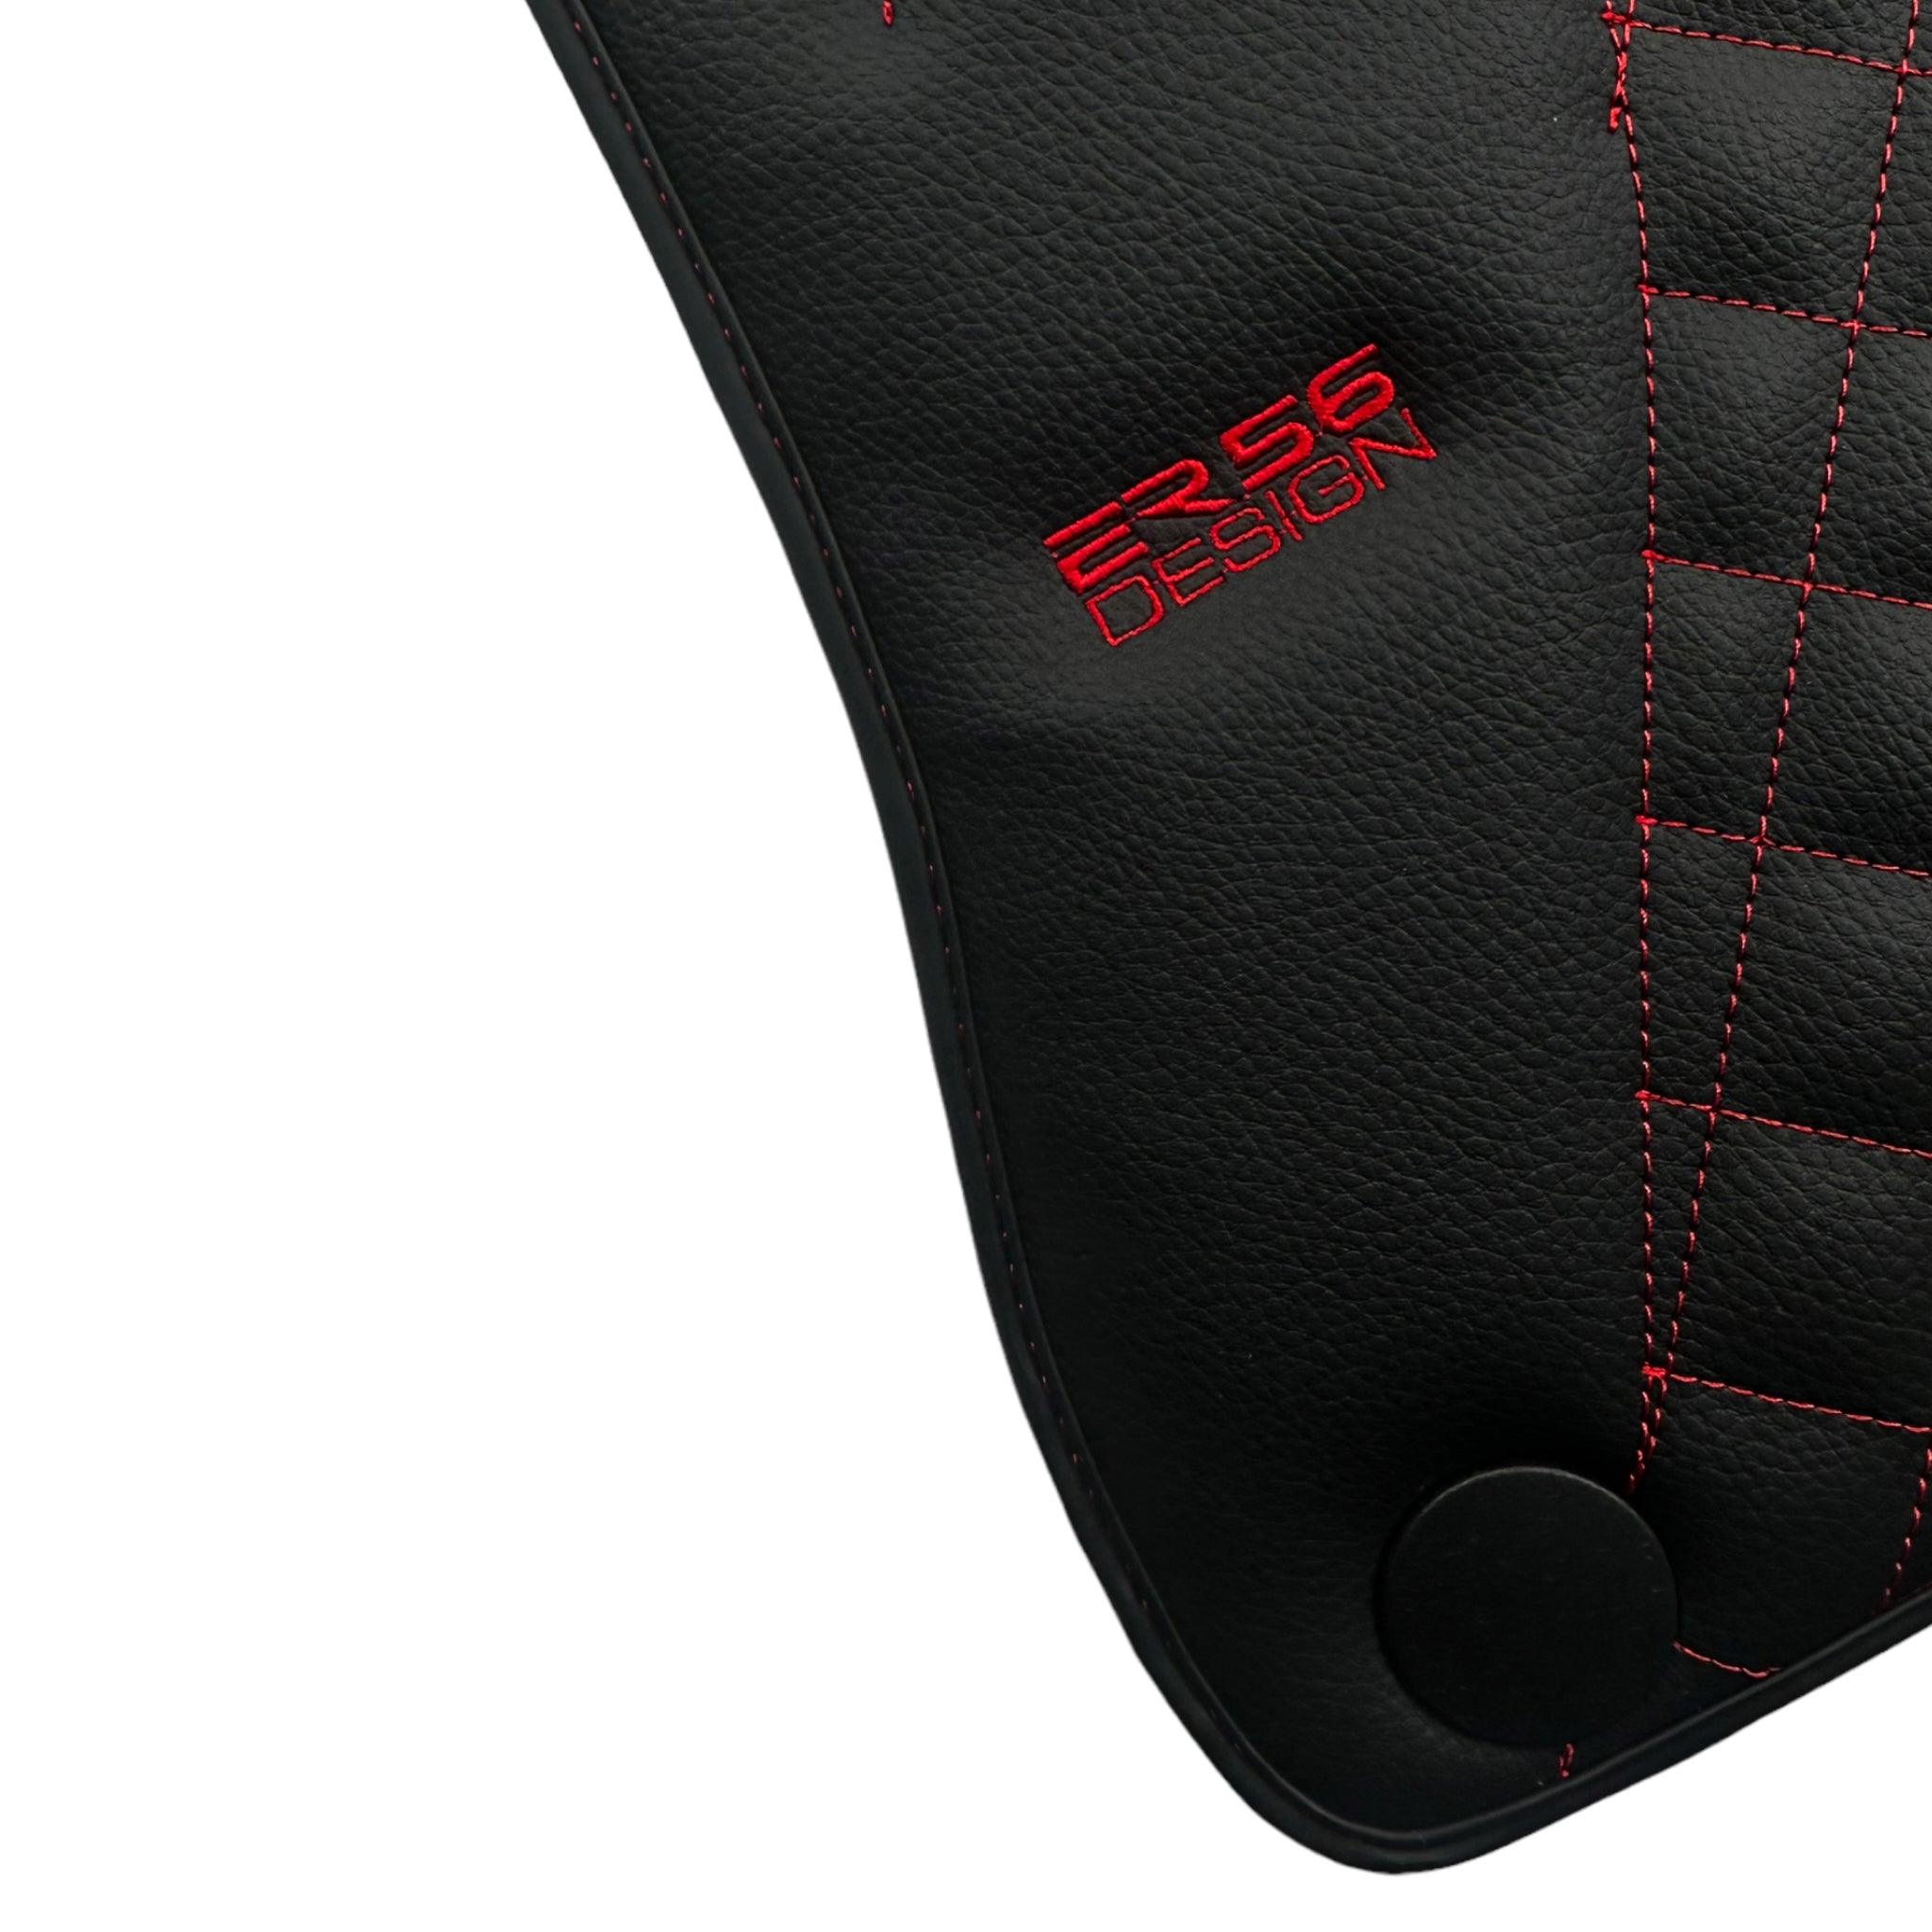 Black Leather Floor Mats For Mercedes Benz GLE-Class C292 Coupe (2015-2020) | ER56 Design